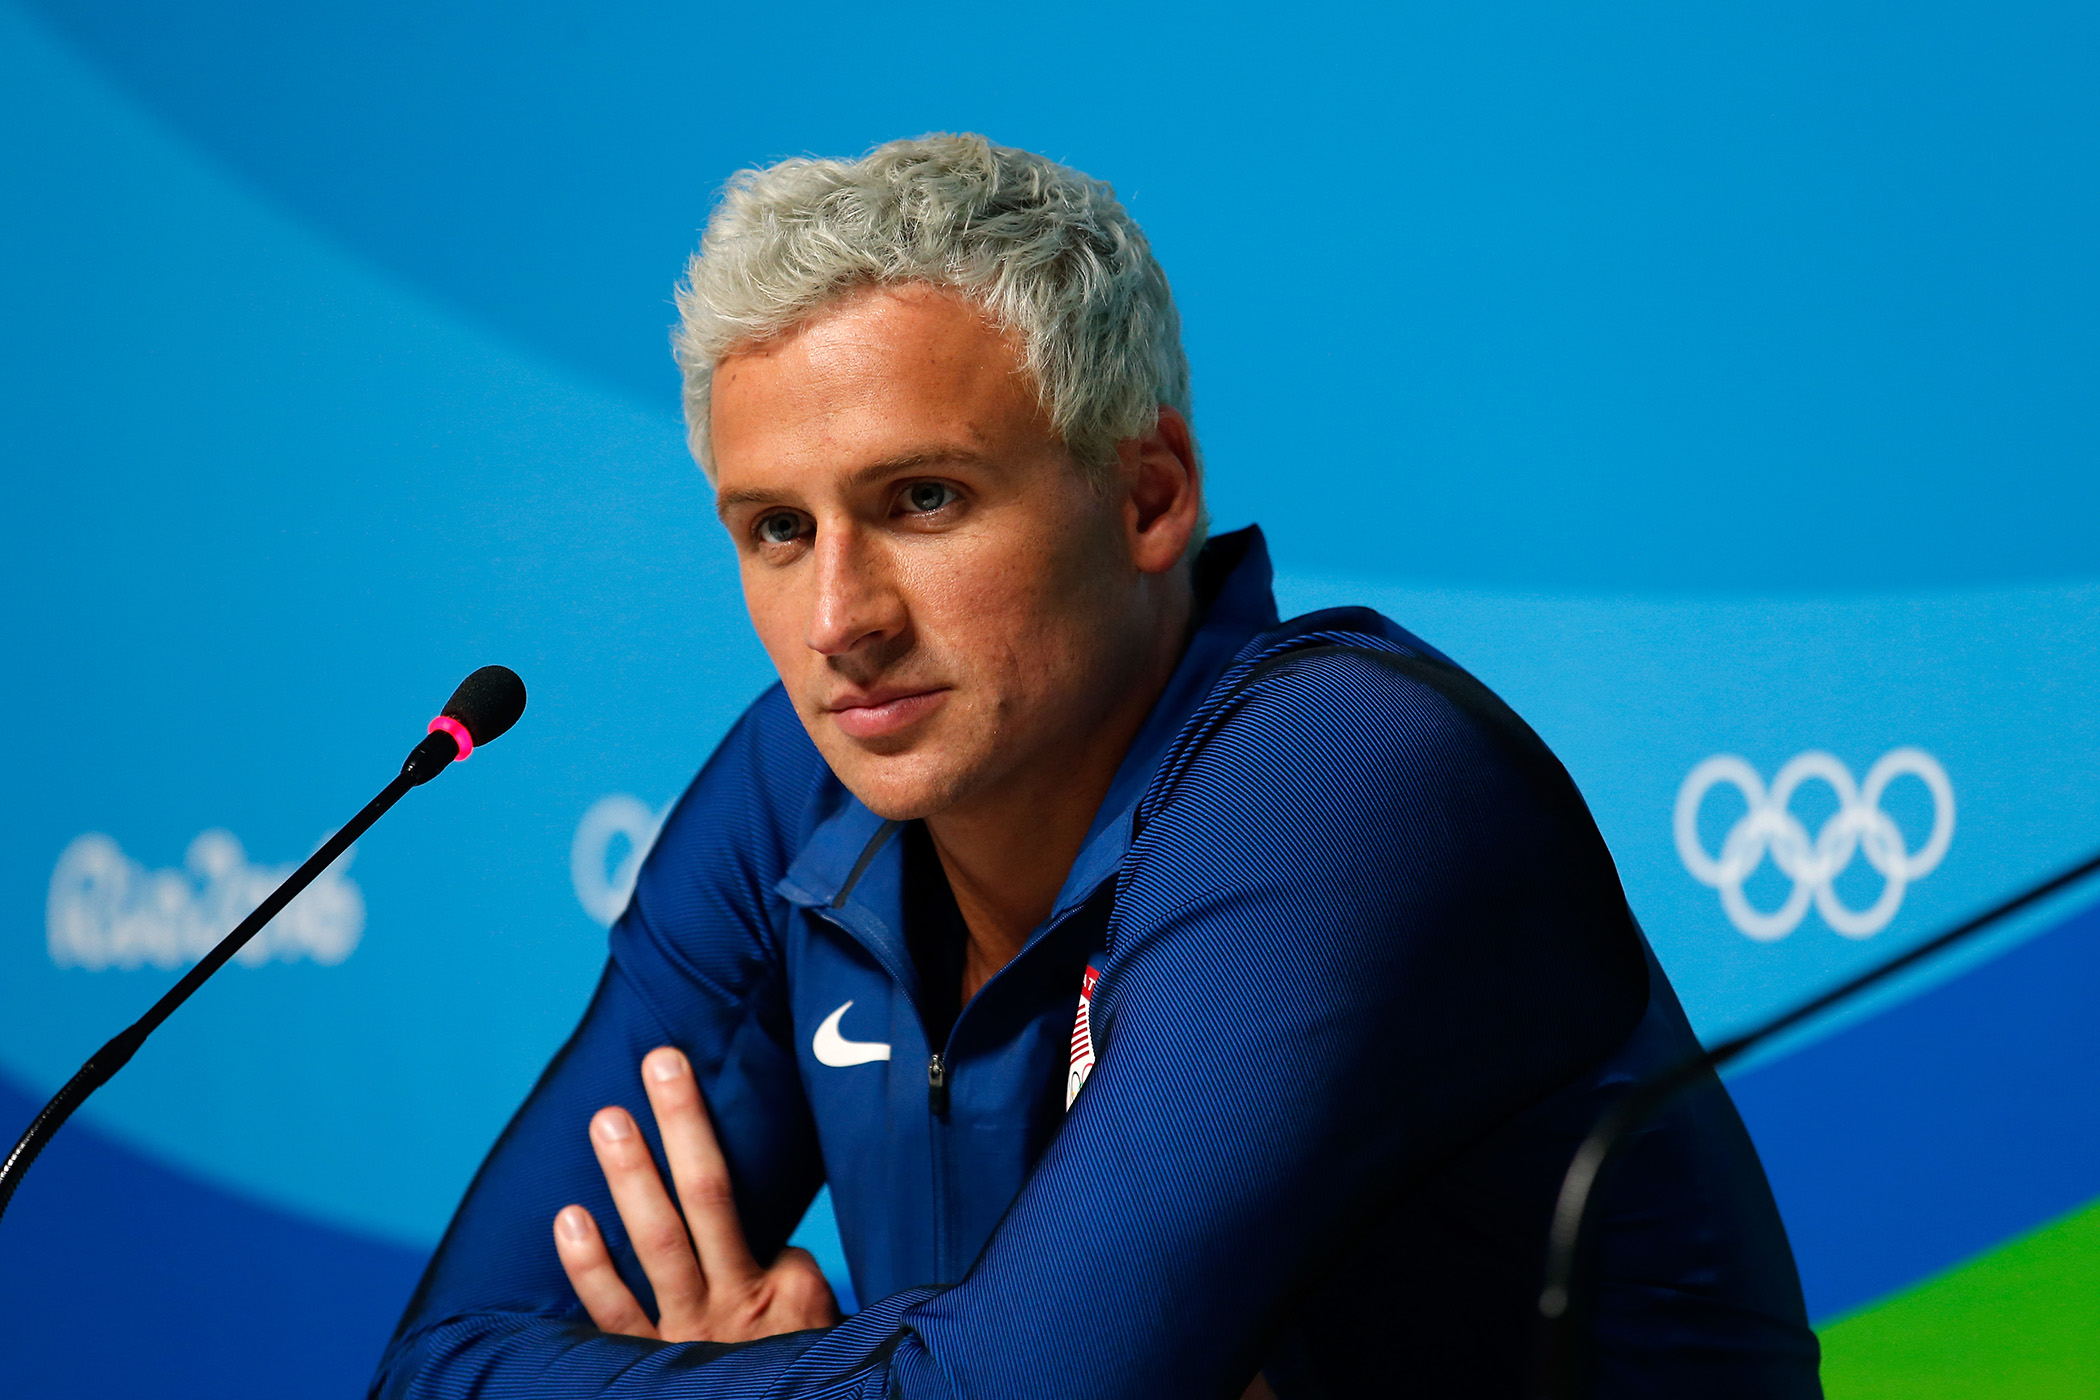 Here's How Ryan Lochte Can Get His Career Back on Track